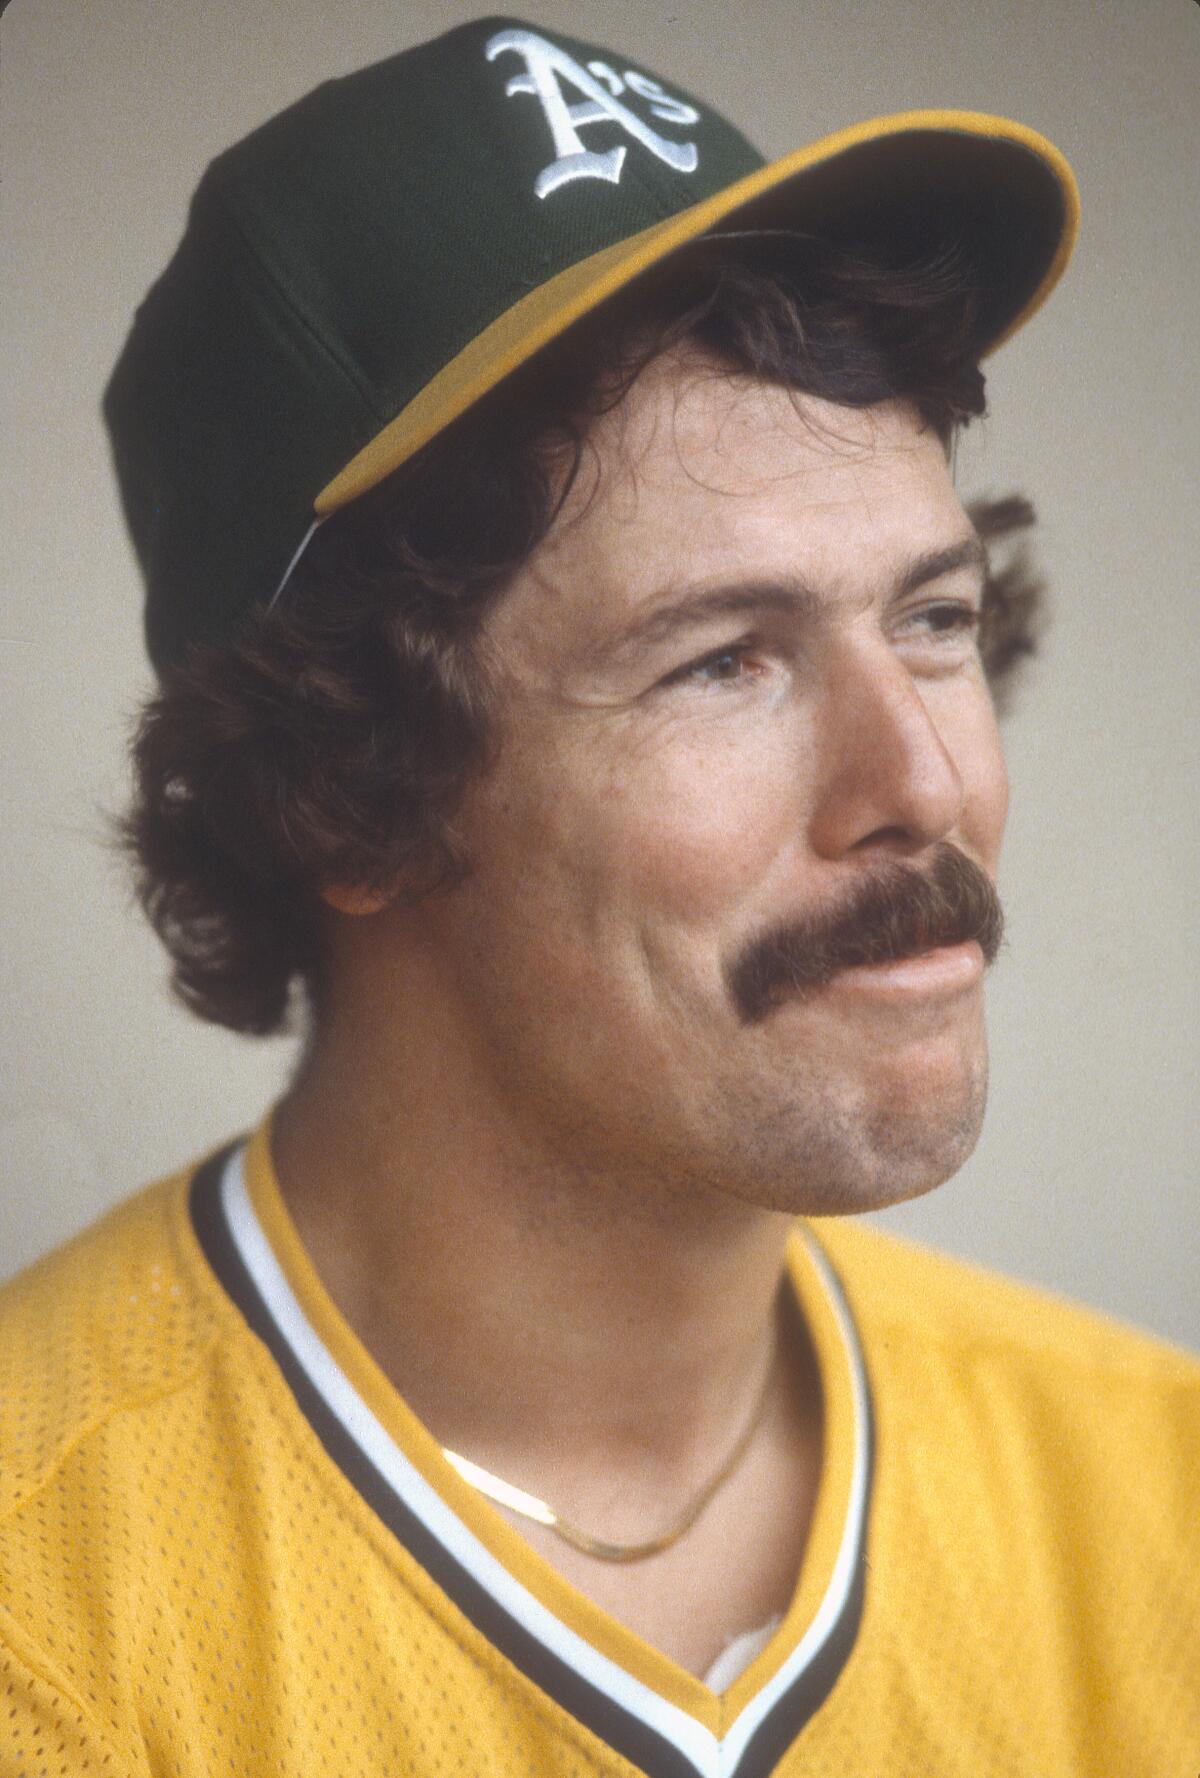 Matt Keough of the Oakland Athletics looks on from the dugout prior to the start of a game in 1981. Keough played for the Athletics from 1977-83.